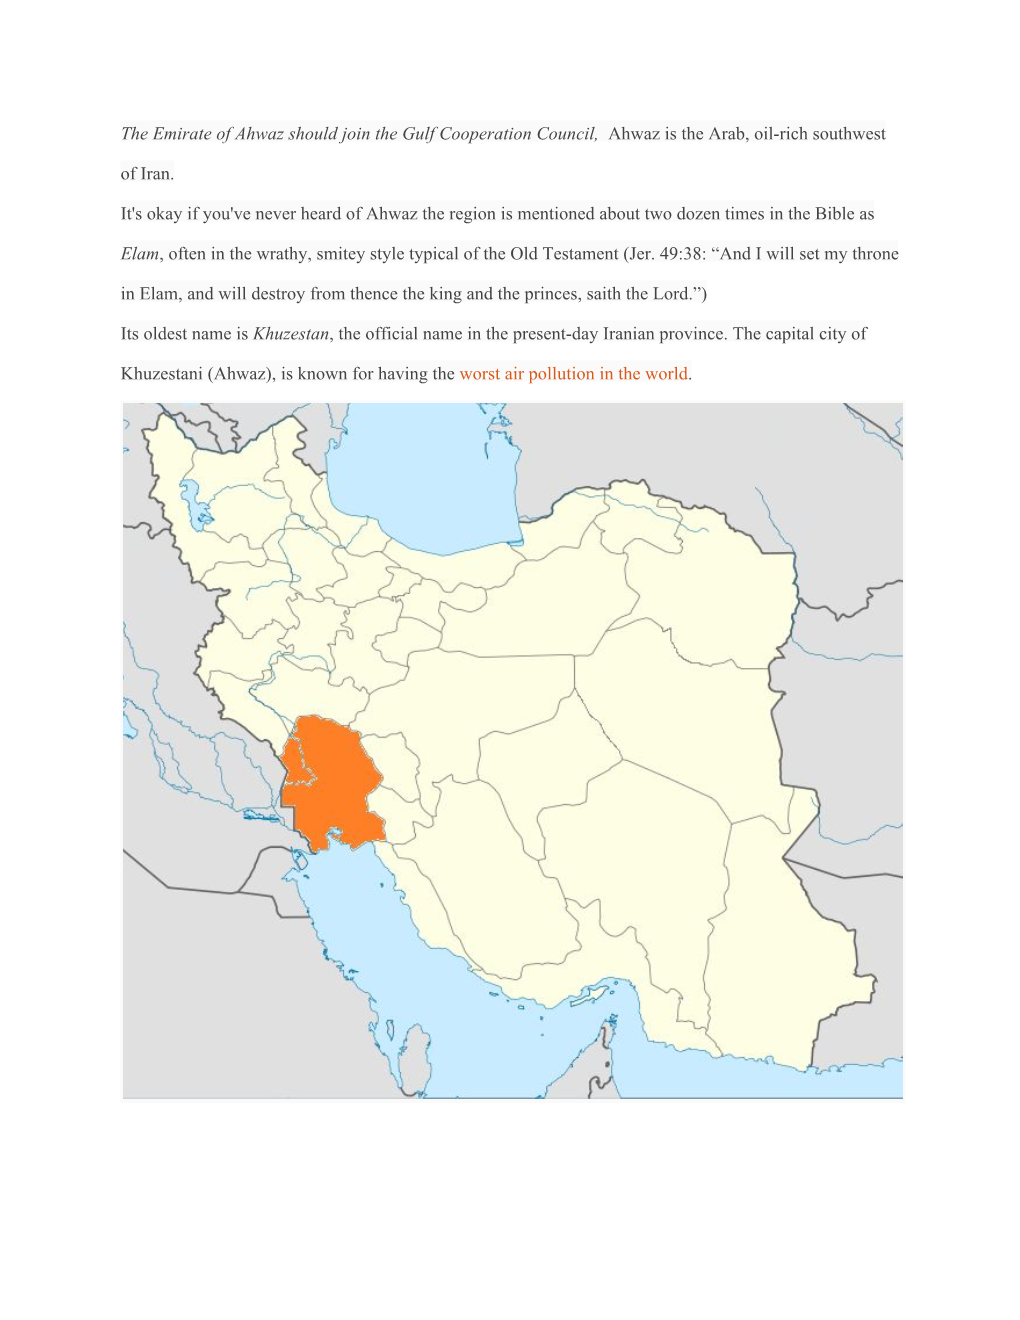 The Emirate of Ahwaz Should Join the Gulf Cooperation Council, ​ Ahwaz